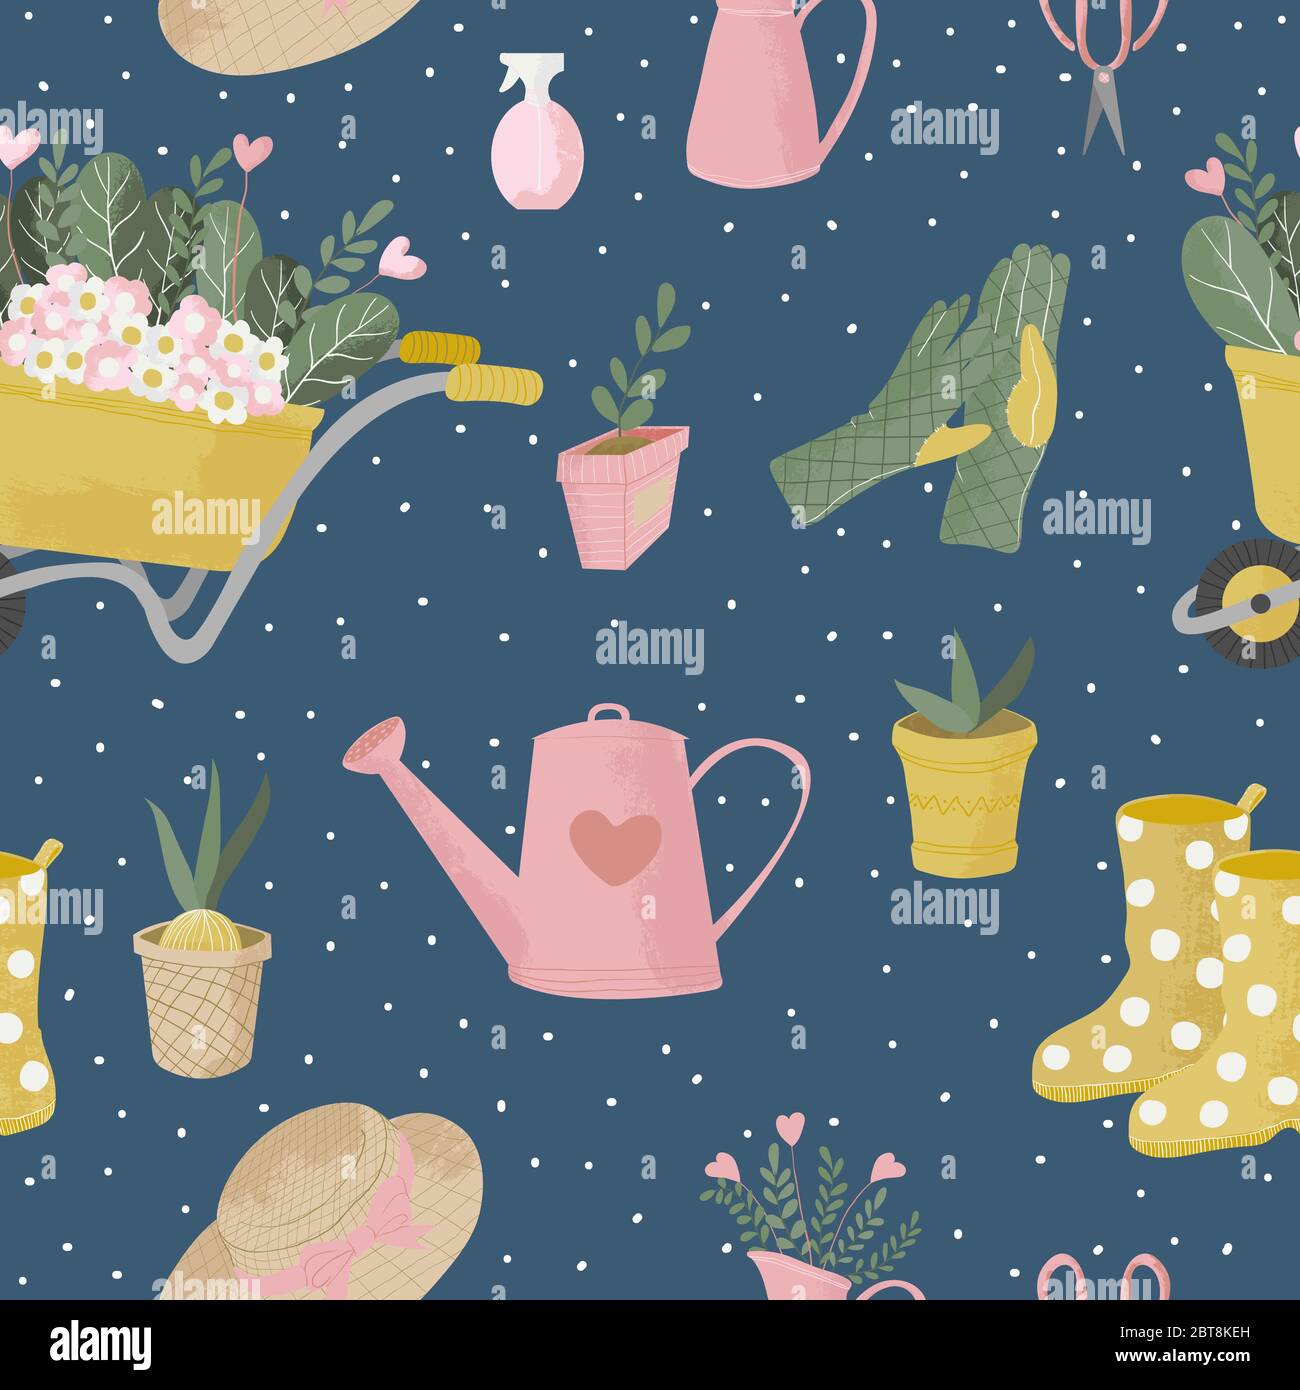 Vector seamless pattern with gardening tools. Hand drawn cute flat icon with texture or garden equipment and flowers on blue background. Stock Vector